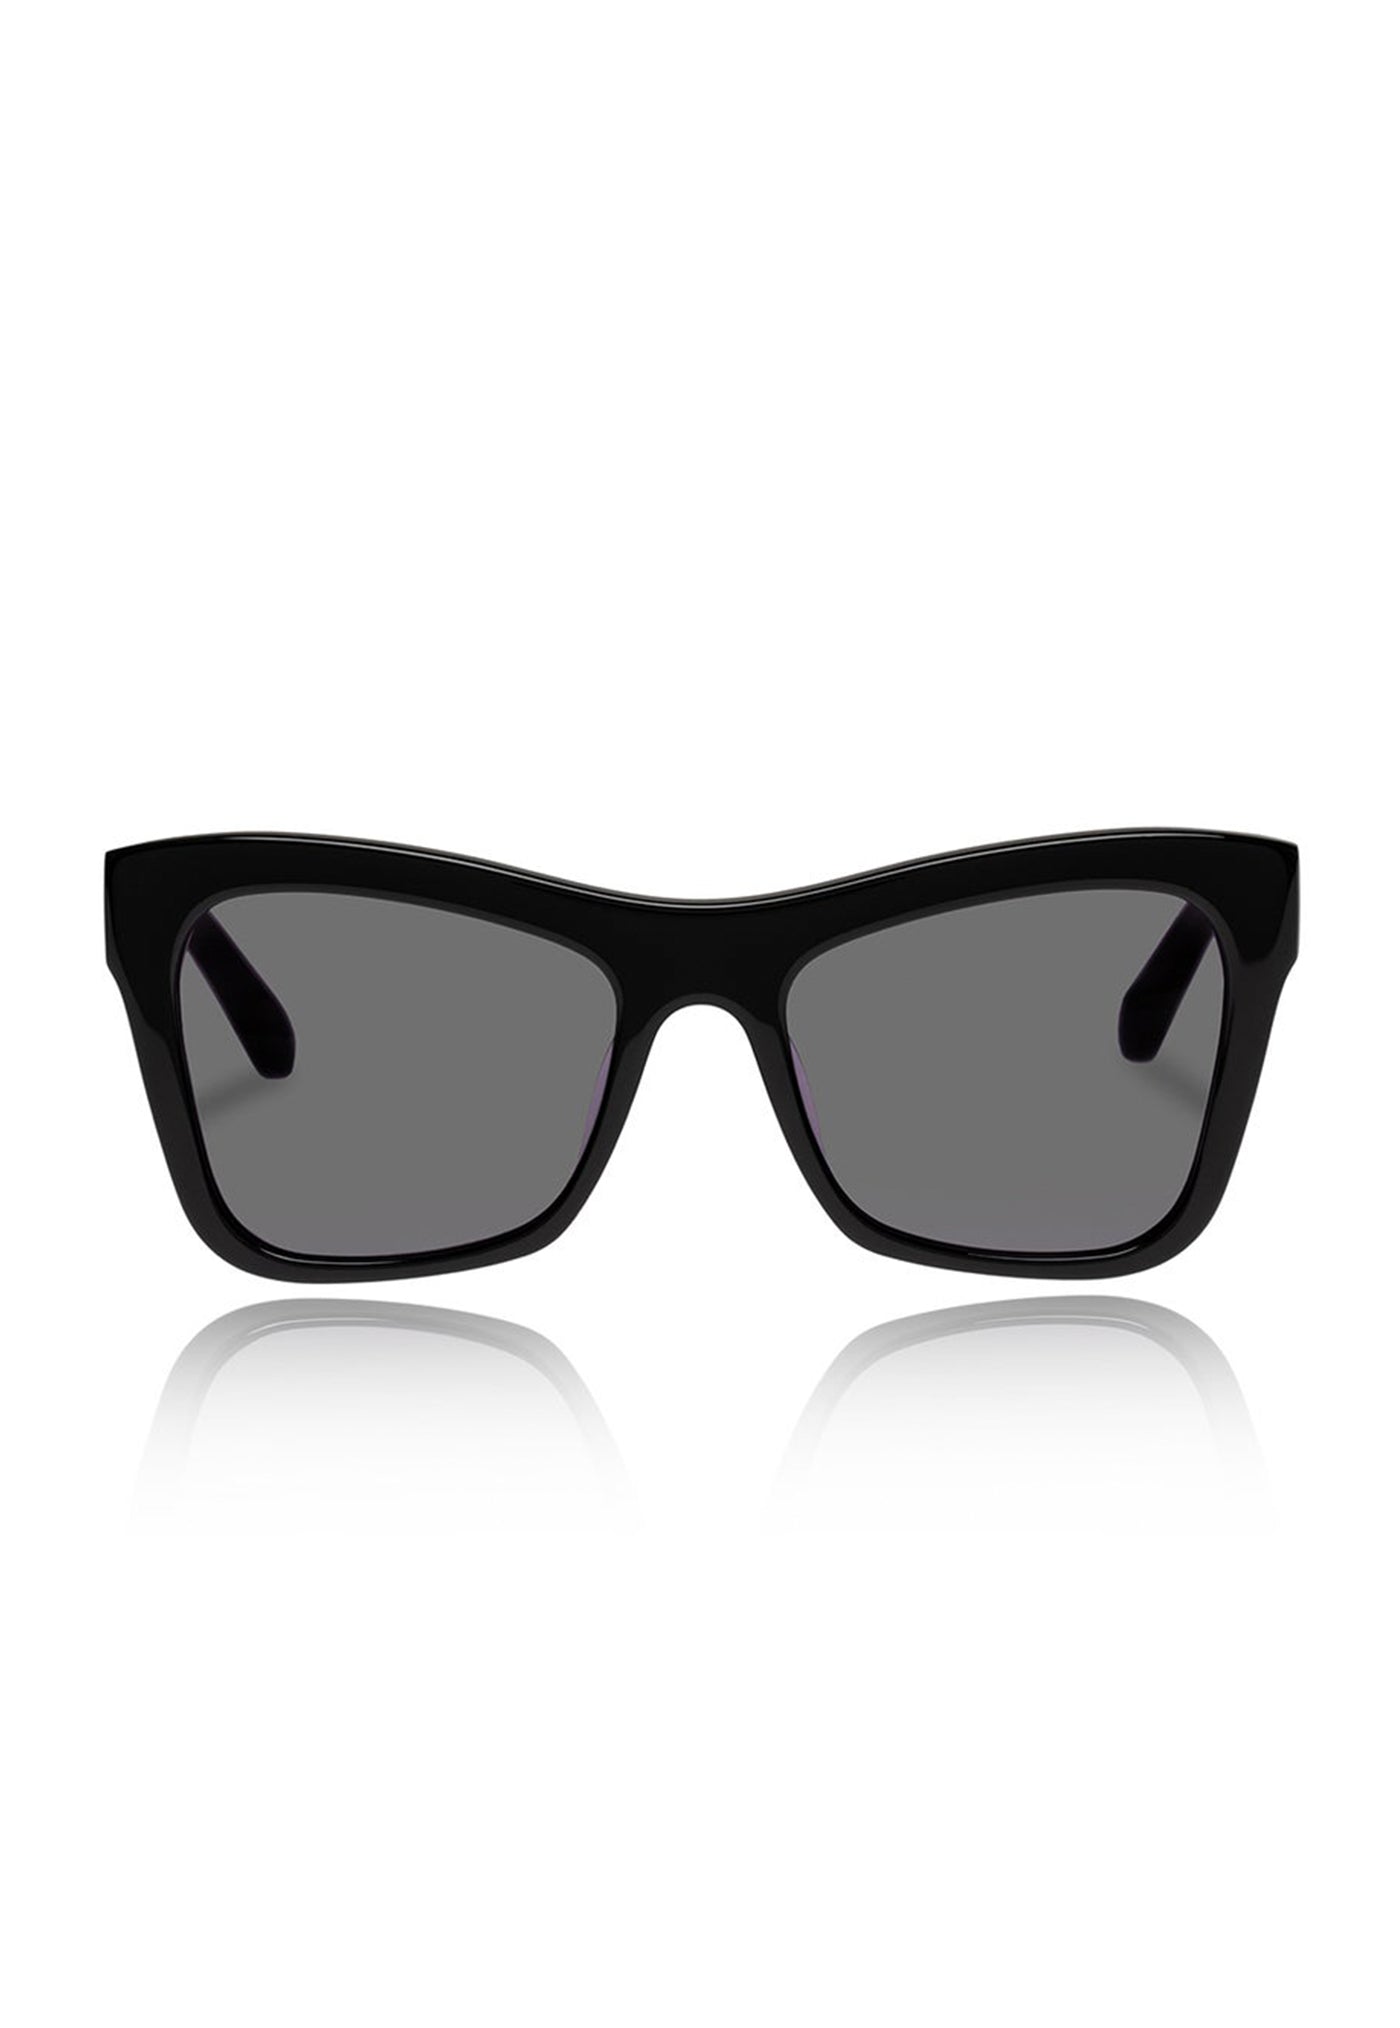 Hallowed Sunglasses - Black sold by Angel Divine